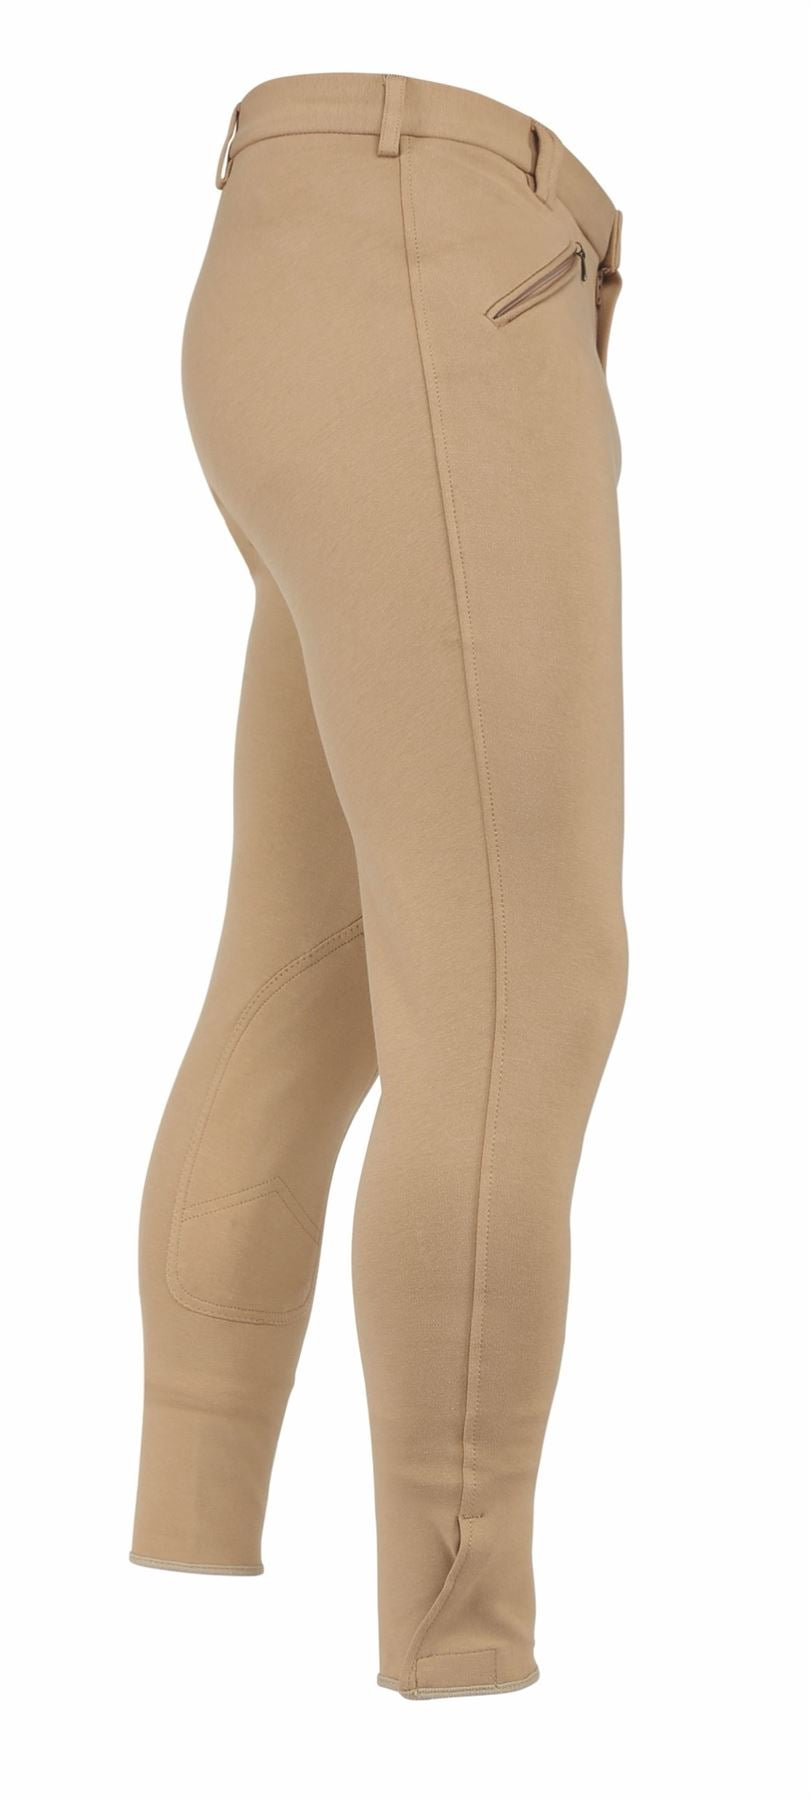 Shires Saddlehugger Breeches - Gents - Just Horse Riders